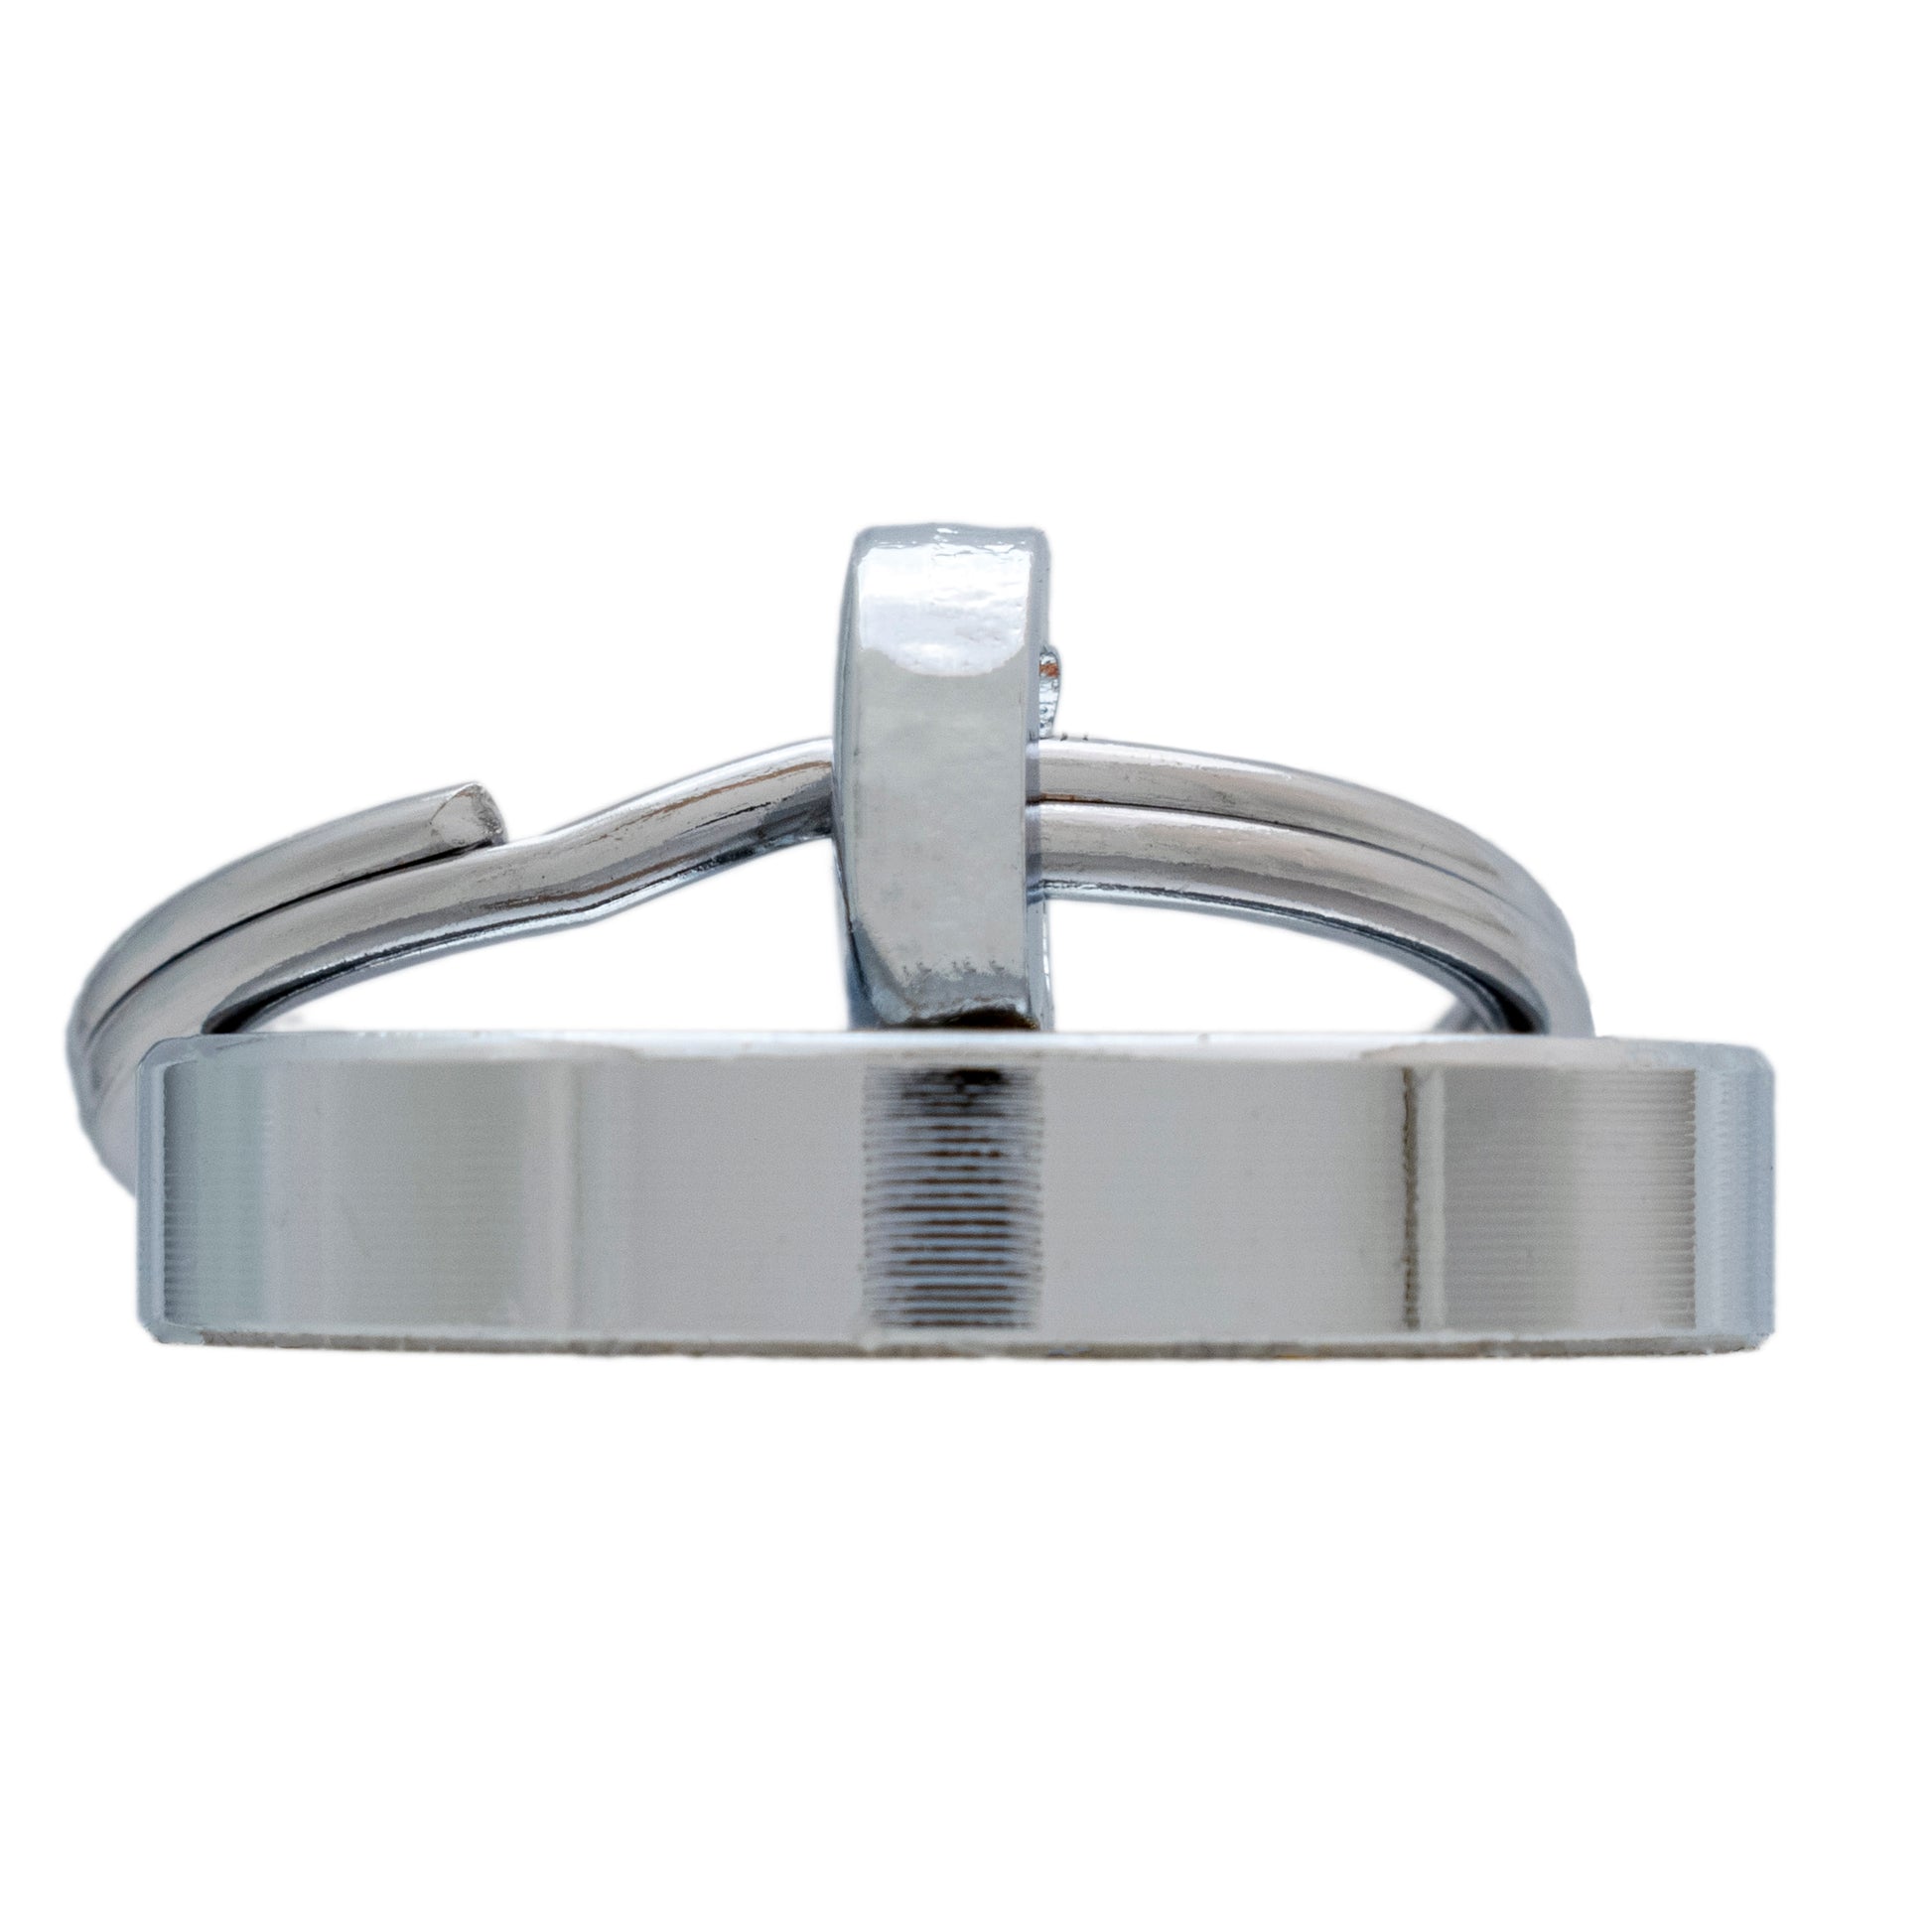 Load image into Gallery viewer, NA011200N Neodymium Magnetic Keyring - Front View